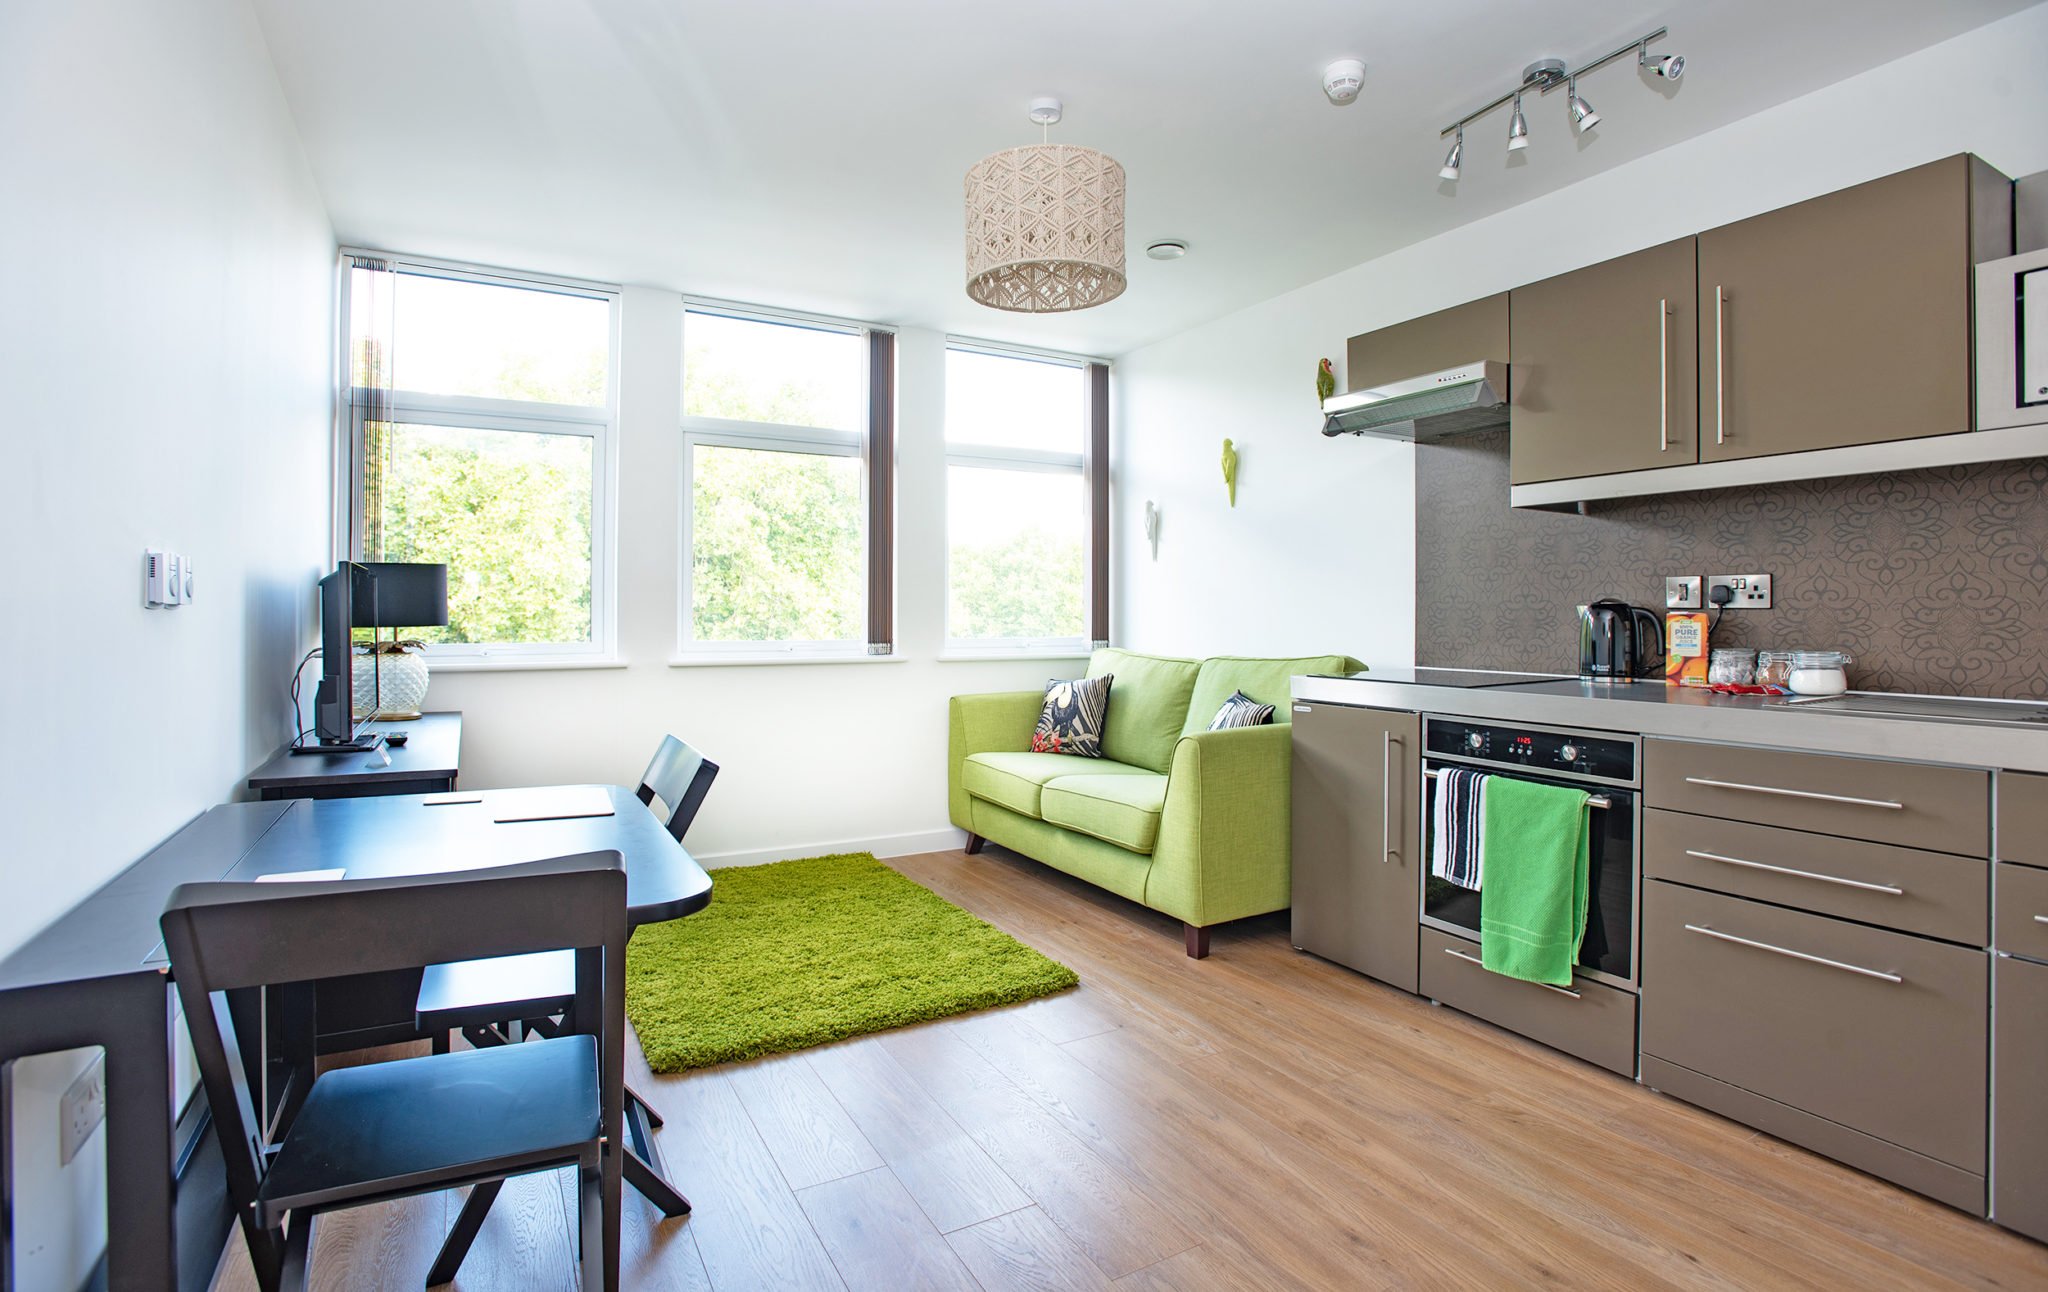 Furnished Accommodation Southampton in Portcullis House | Cheap Short Let Apartments near Southampton port | Lift, Fully equipped kitchen | Urban Stay